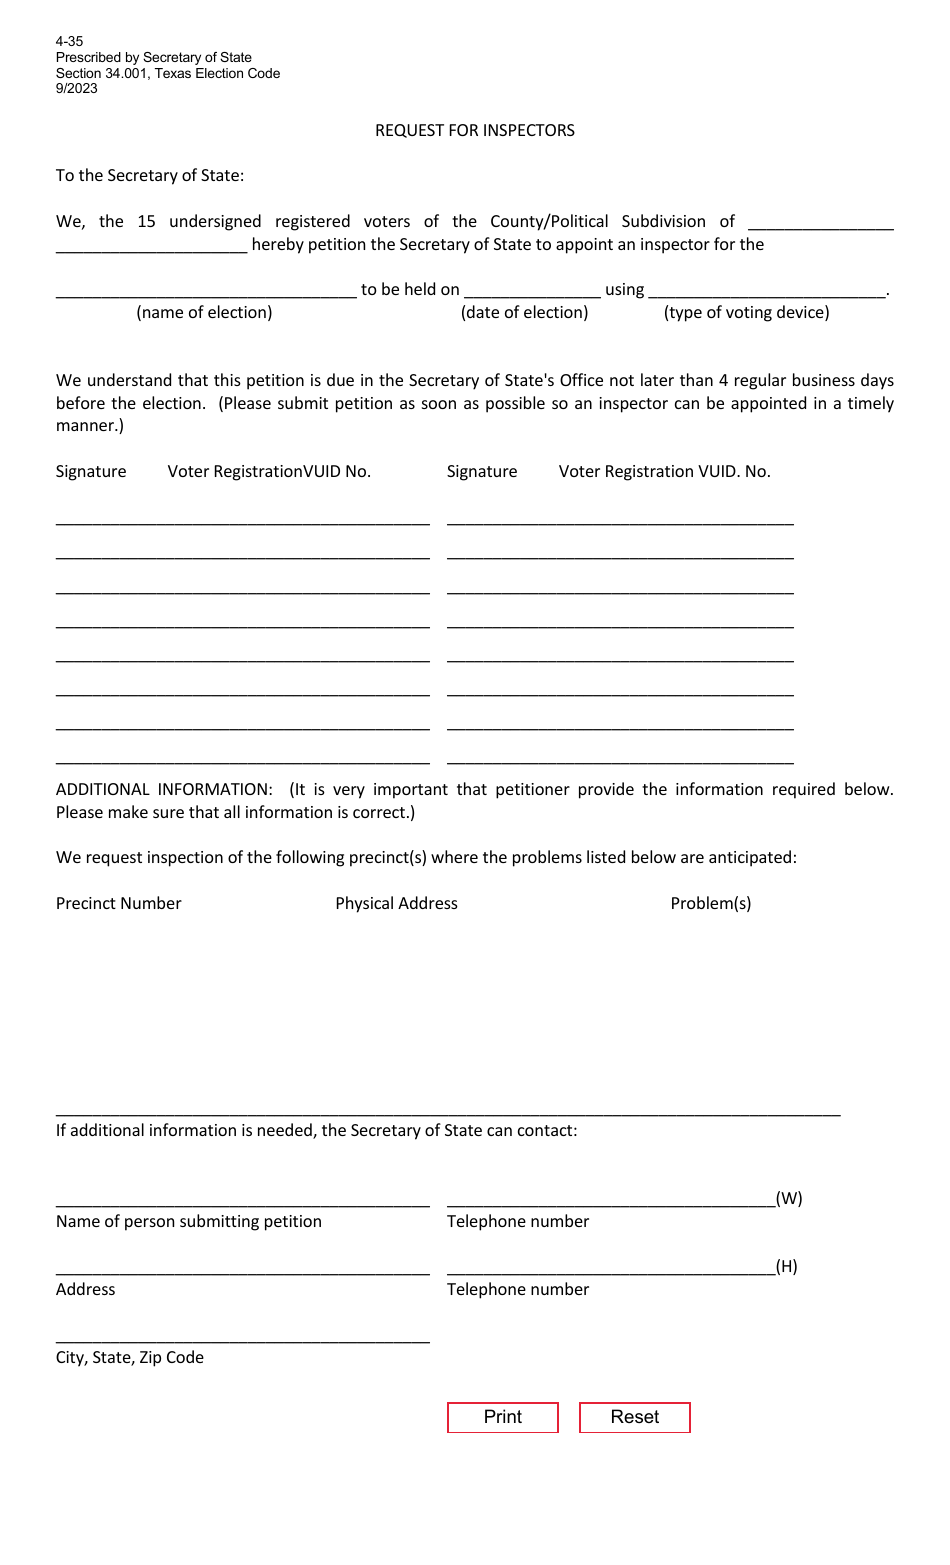 Form 4-35 Request for Inspectors - Texas (English / Spanish), Page 1